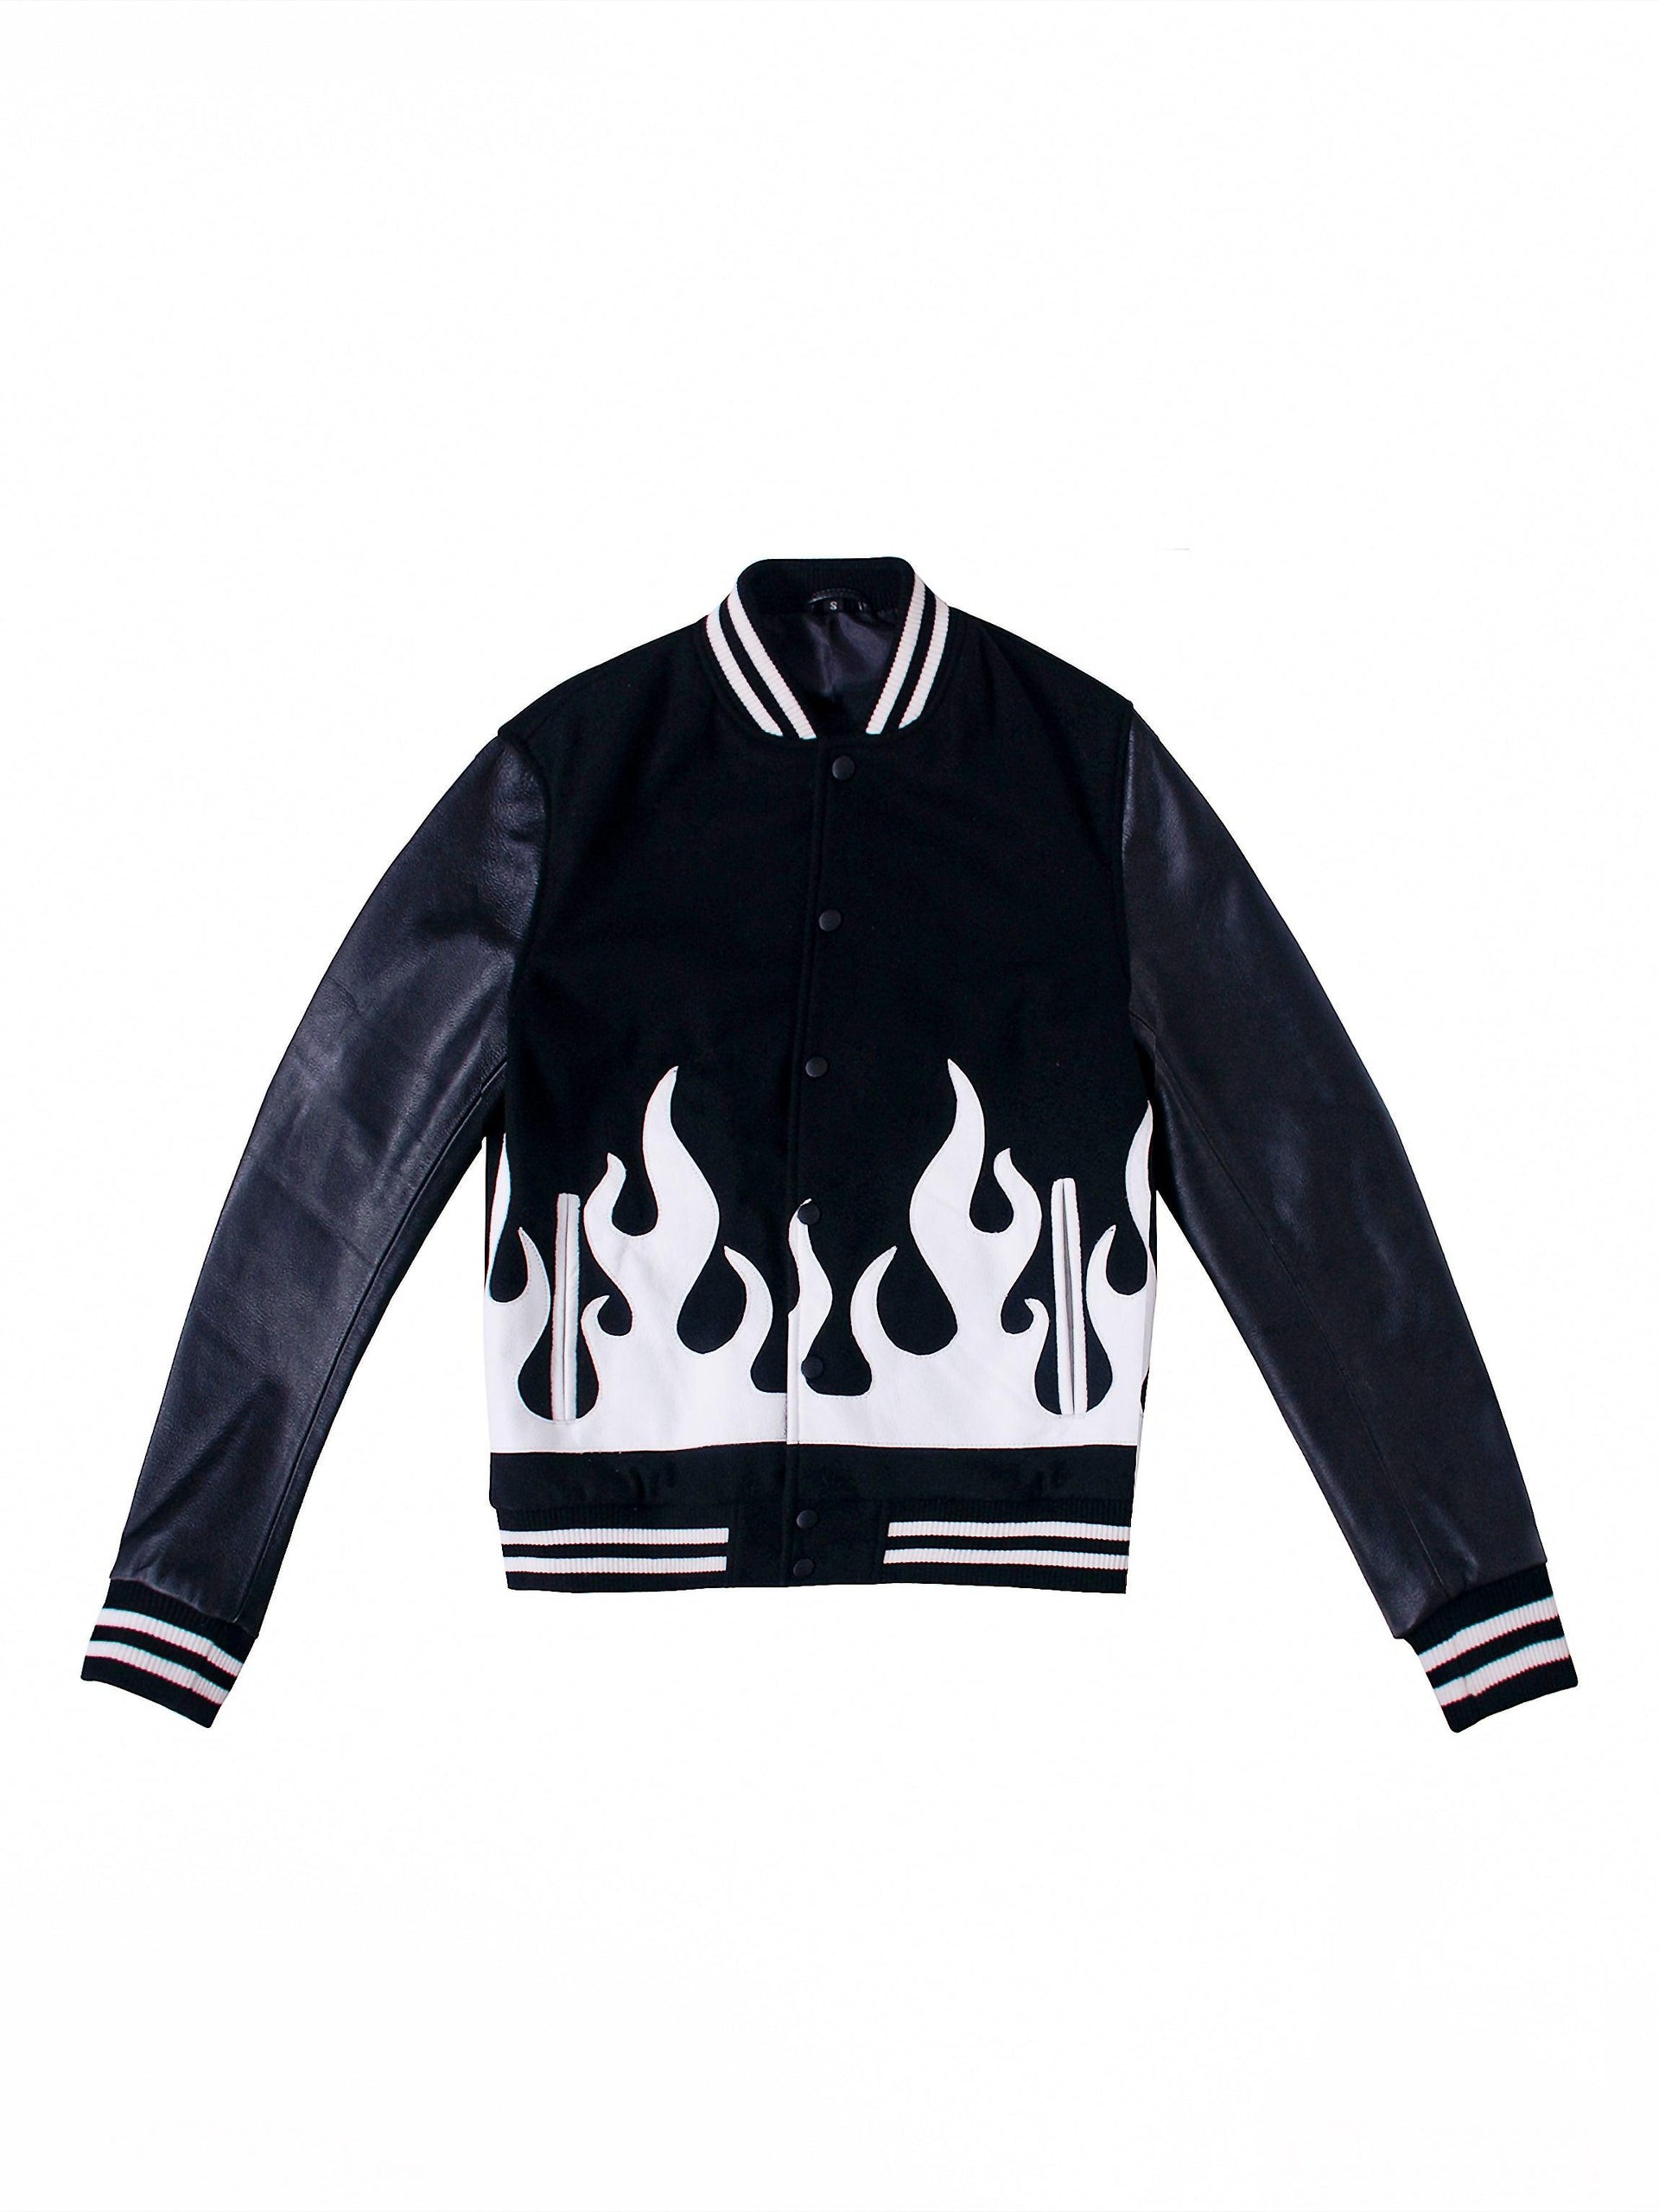 Casa of K Official Online Store Contra Red Varsity Bomber Jacket 2XL